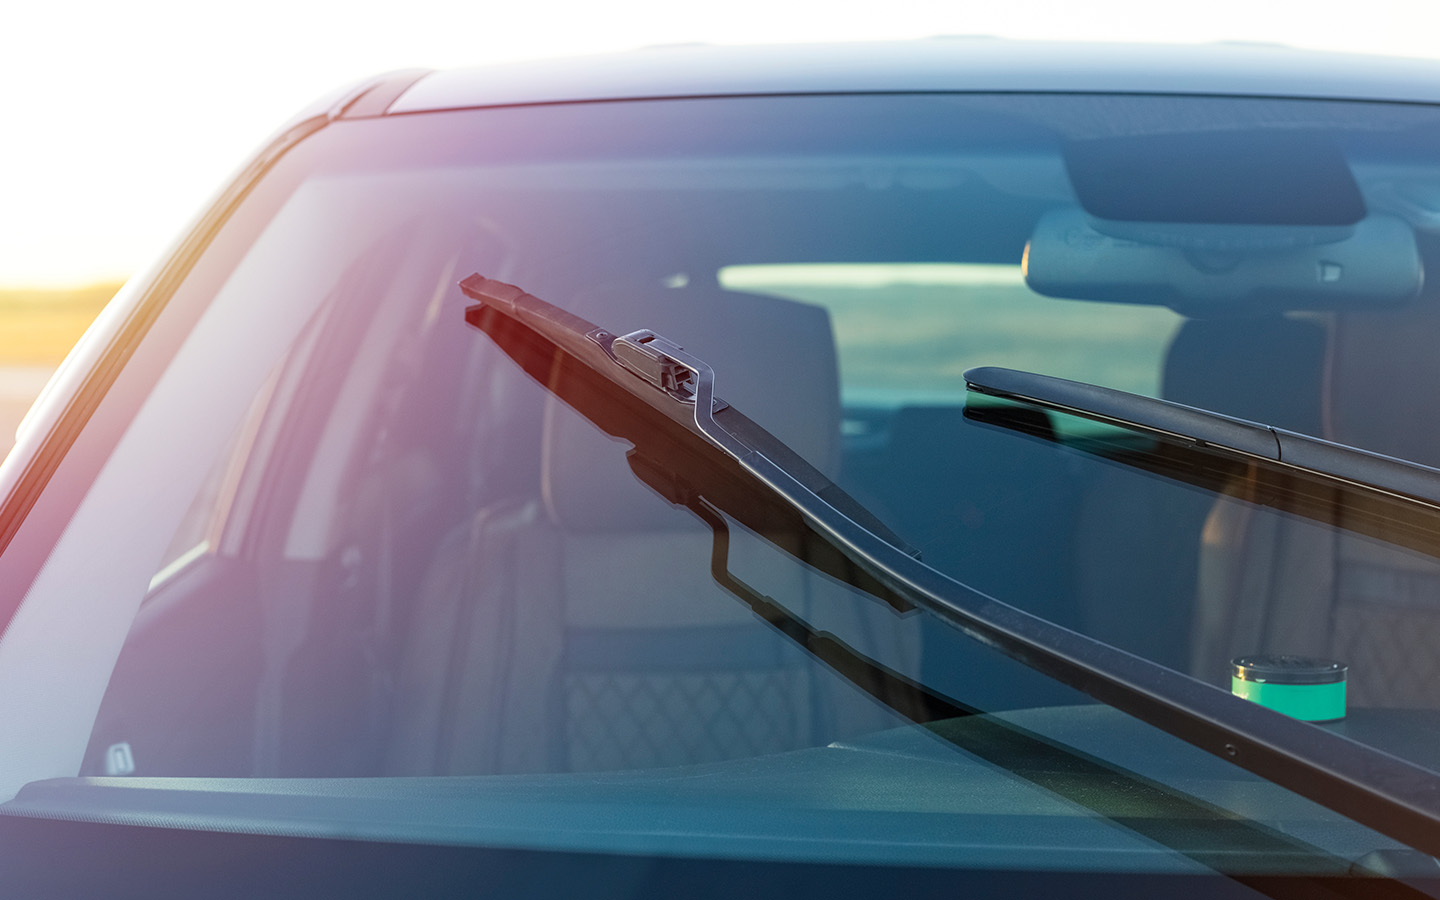 cleaning car windshield and wipers regularly is among the effective car driving hacks